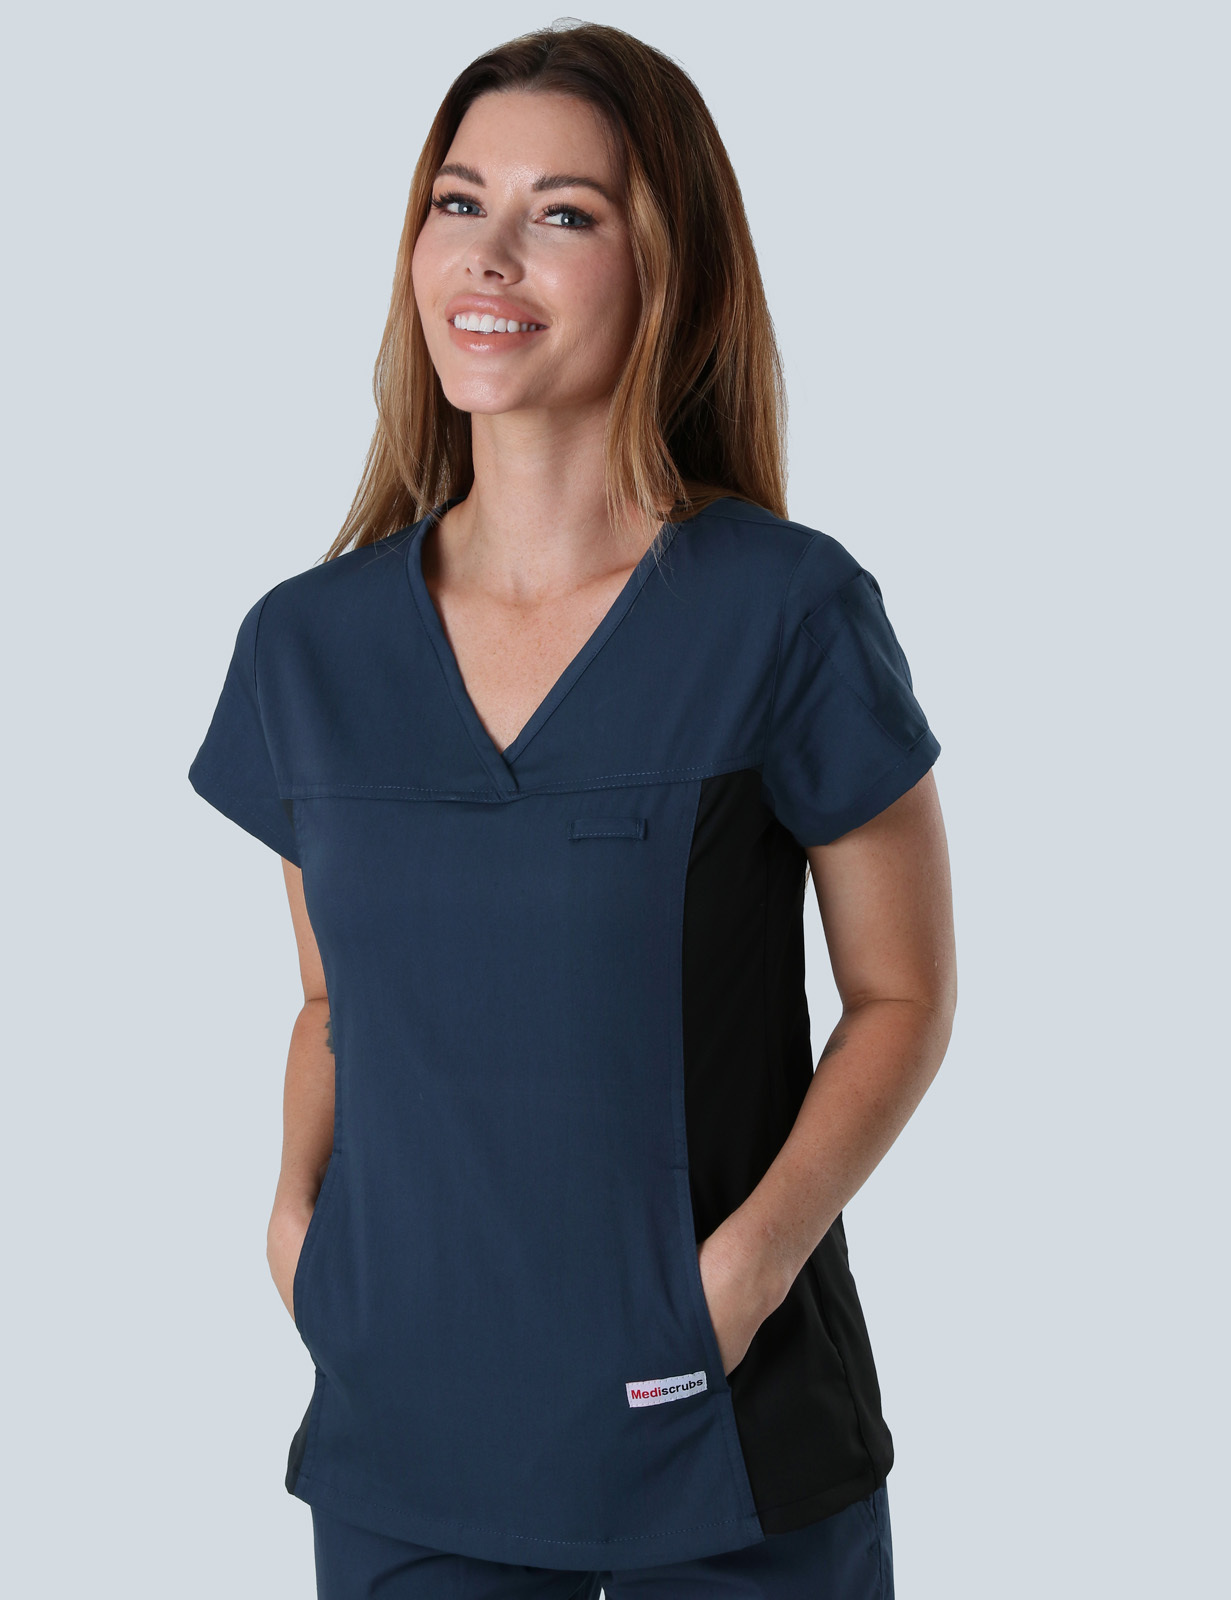 Gladstone Hospital - ED RN (Women's Fit Spandex Scrub Top and Cargo Pants in Navy incl Logos)